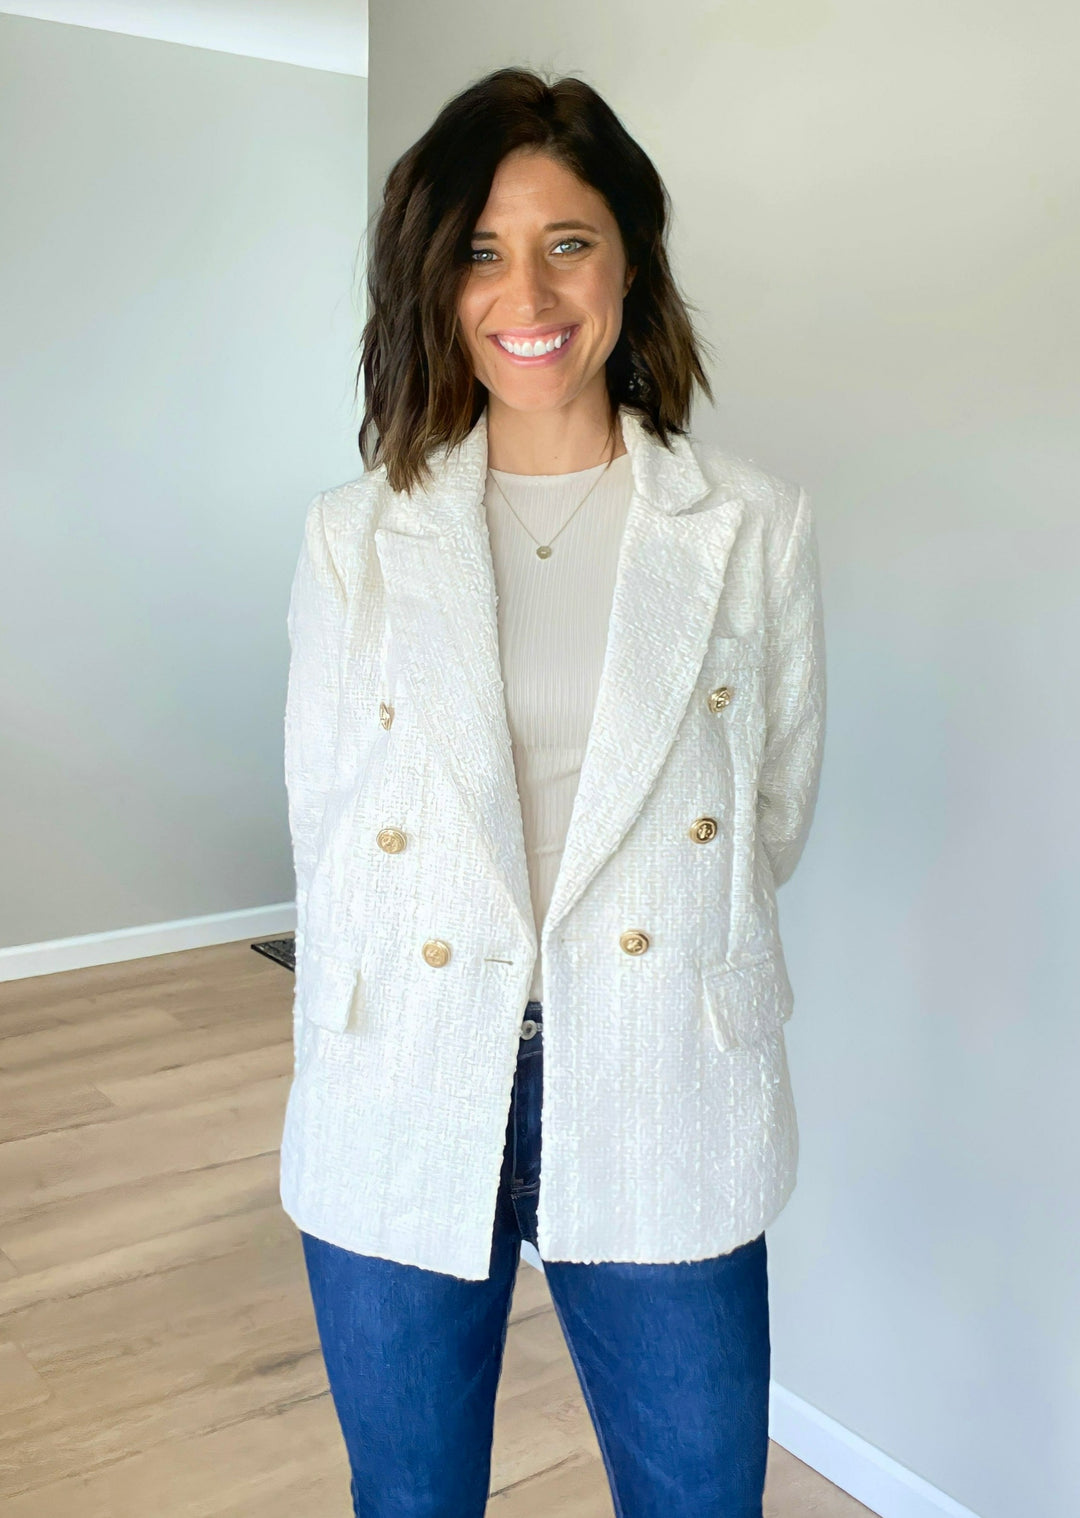 Textured Double Breasted Blazer